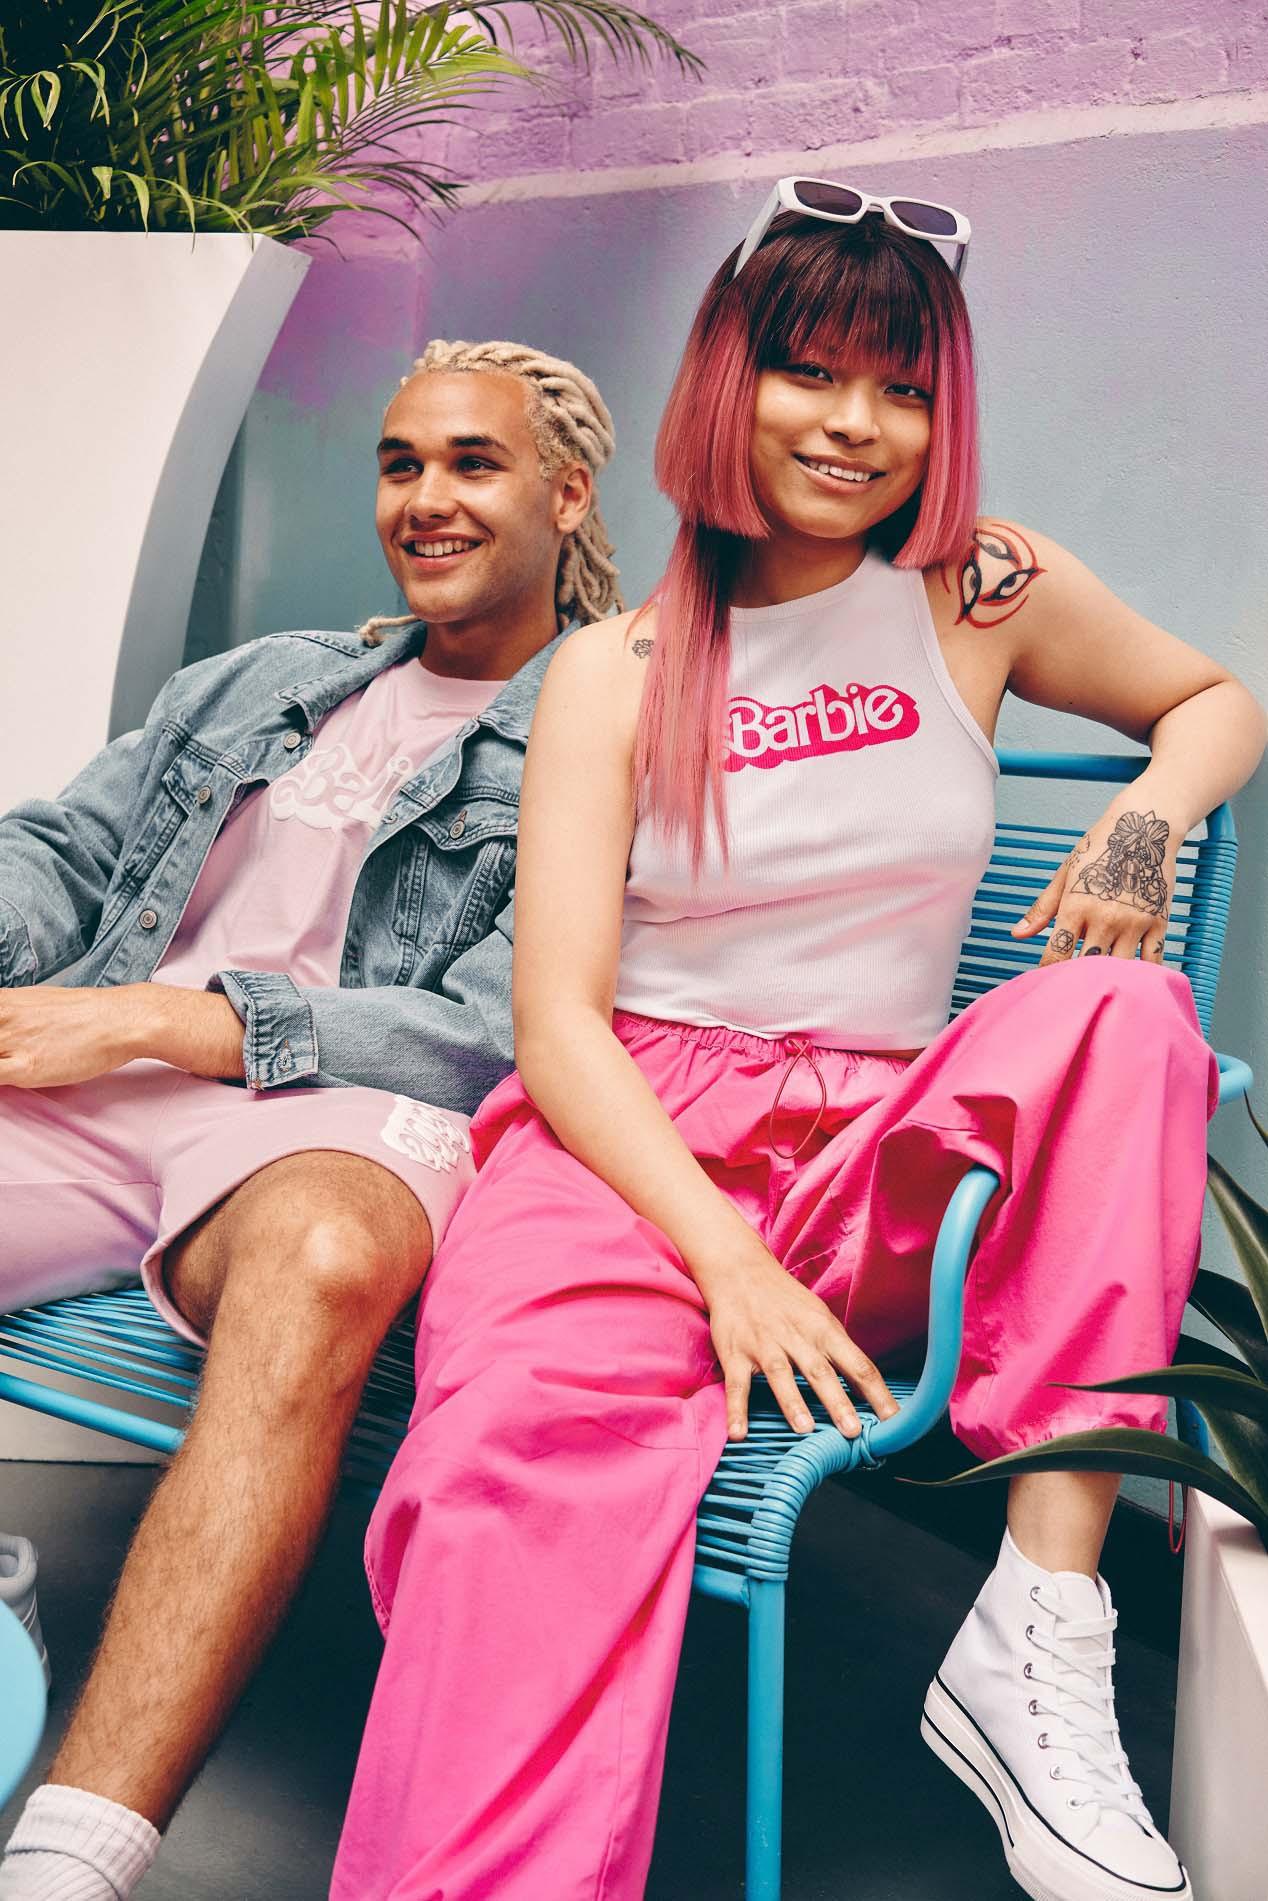 Primark Launches New Capsule Collection to Celebrate the Film of the Summer, Barbie The Movie